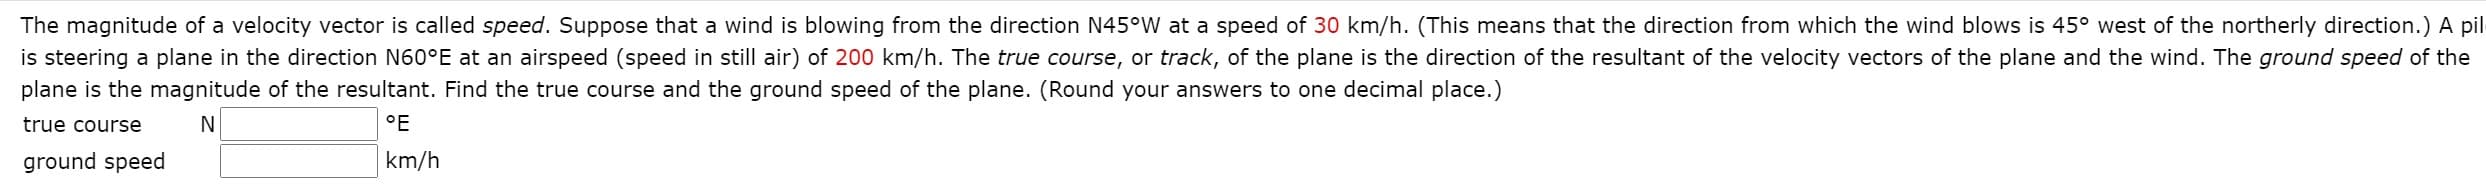 The magnitude of a velocity vector is called speed. Suppose that a wind is blowing from the direction N45°W at a speed of 30 km/h. (This means that the direction from which the wind blows is 45° west of the northerly direction.) A p
is steering a plane in the direction N60°E at an airspeed (speed in still air) of 200 km/h. The true course, or track, of the plane is the direction of the resultant of the velocity vectors of the plane and the wind. The ground speed of the
plane is the magnitude of the resultant. Find the true course and the ground speed of the plane. (Round your answers to one decimal place.)
true coIurse
N
°F
